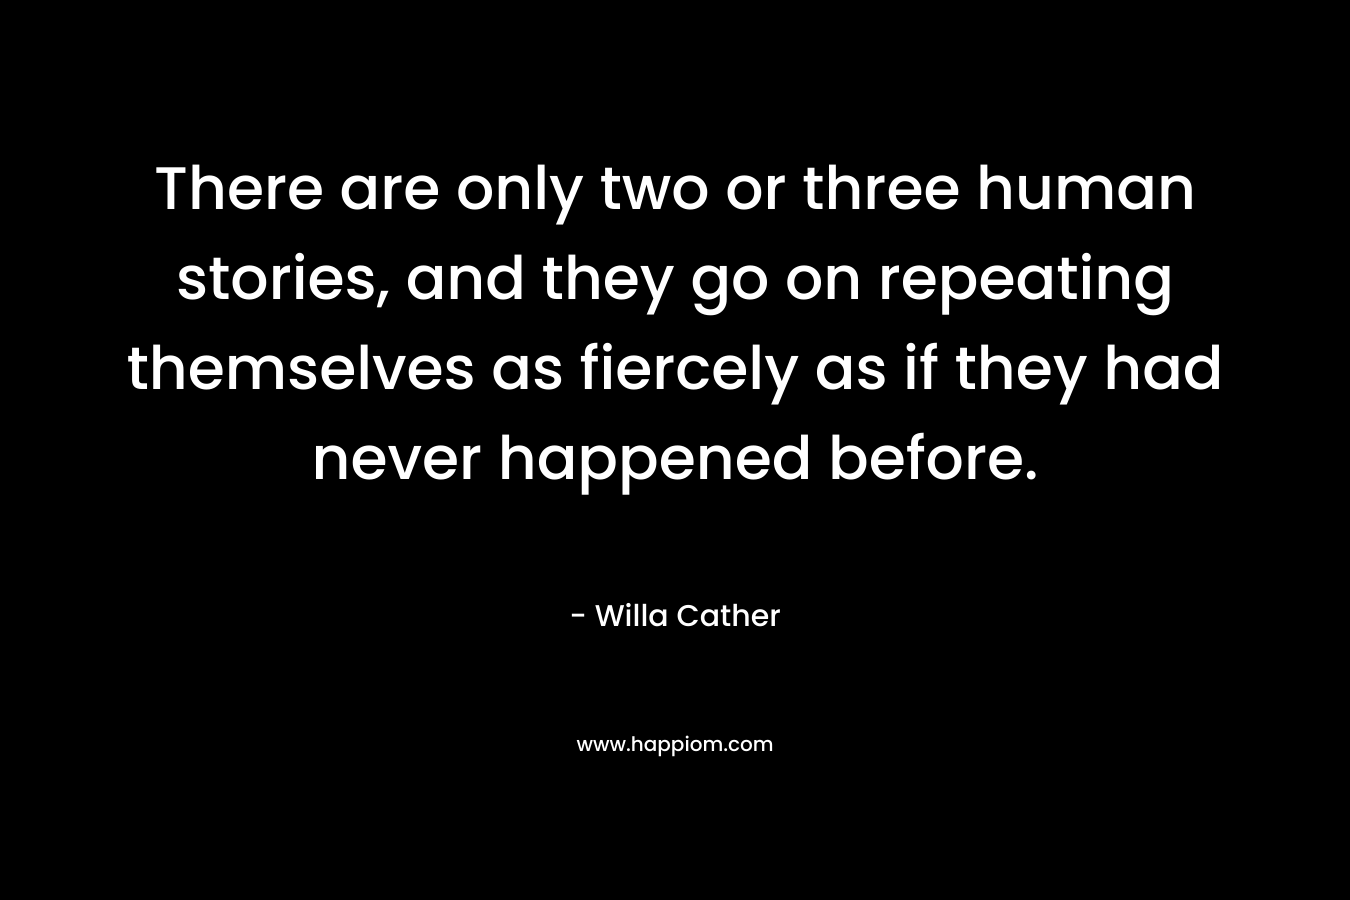 There are only two or three human stories, and they go on repeating themselves as fiercely as if they had never happened before.